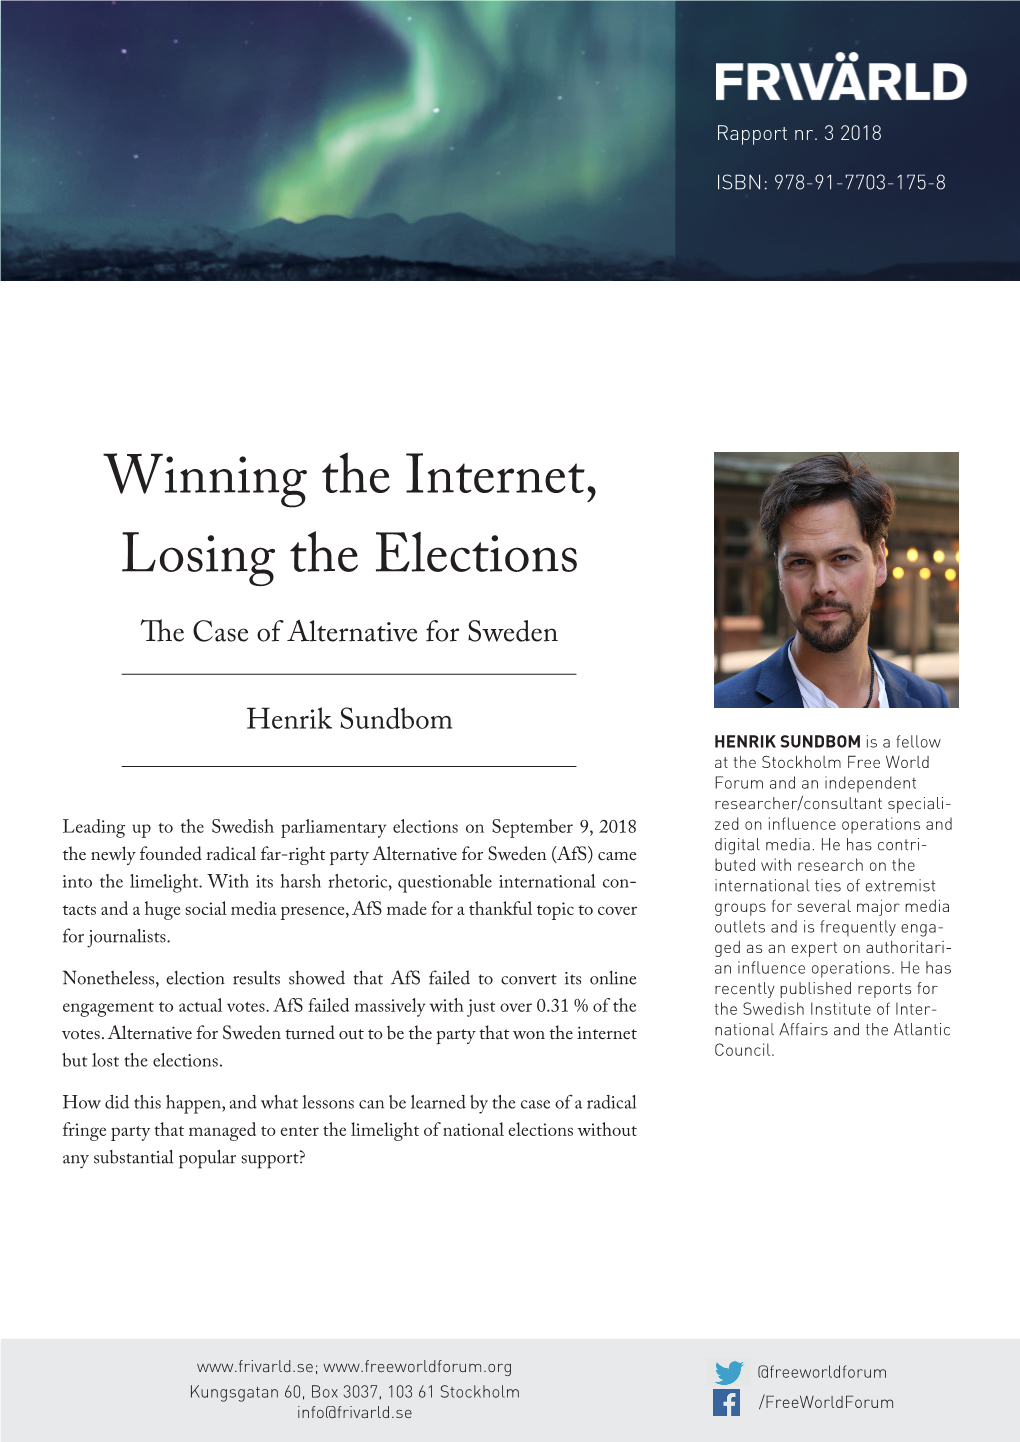 Winning the Internet, Losing the Elections